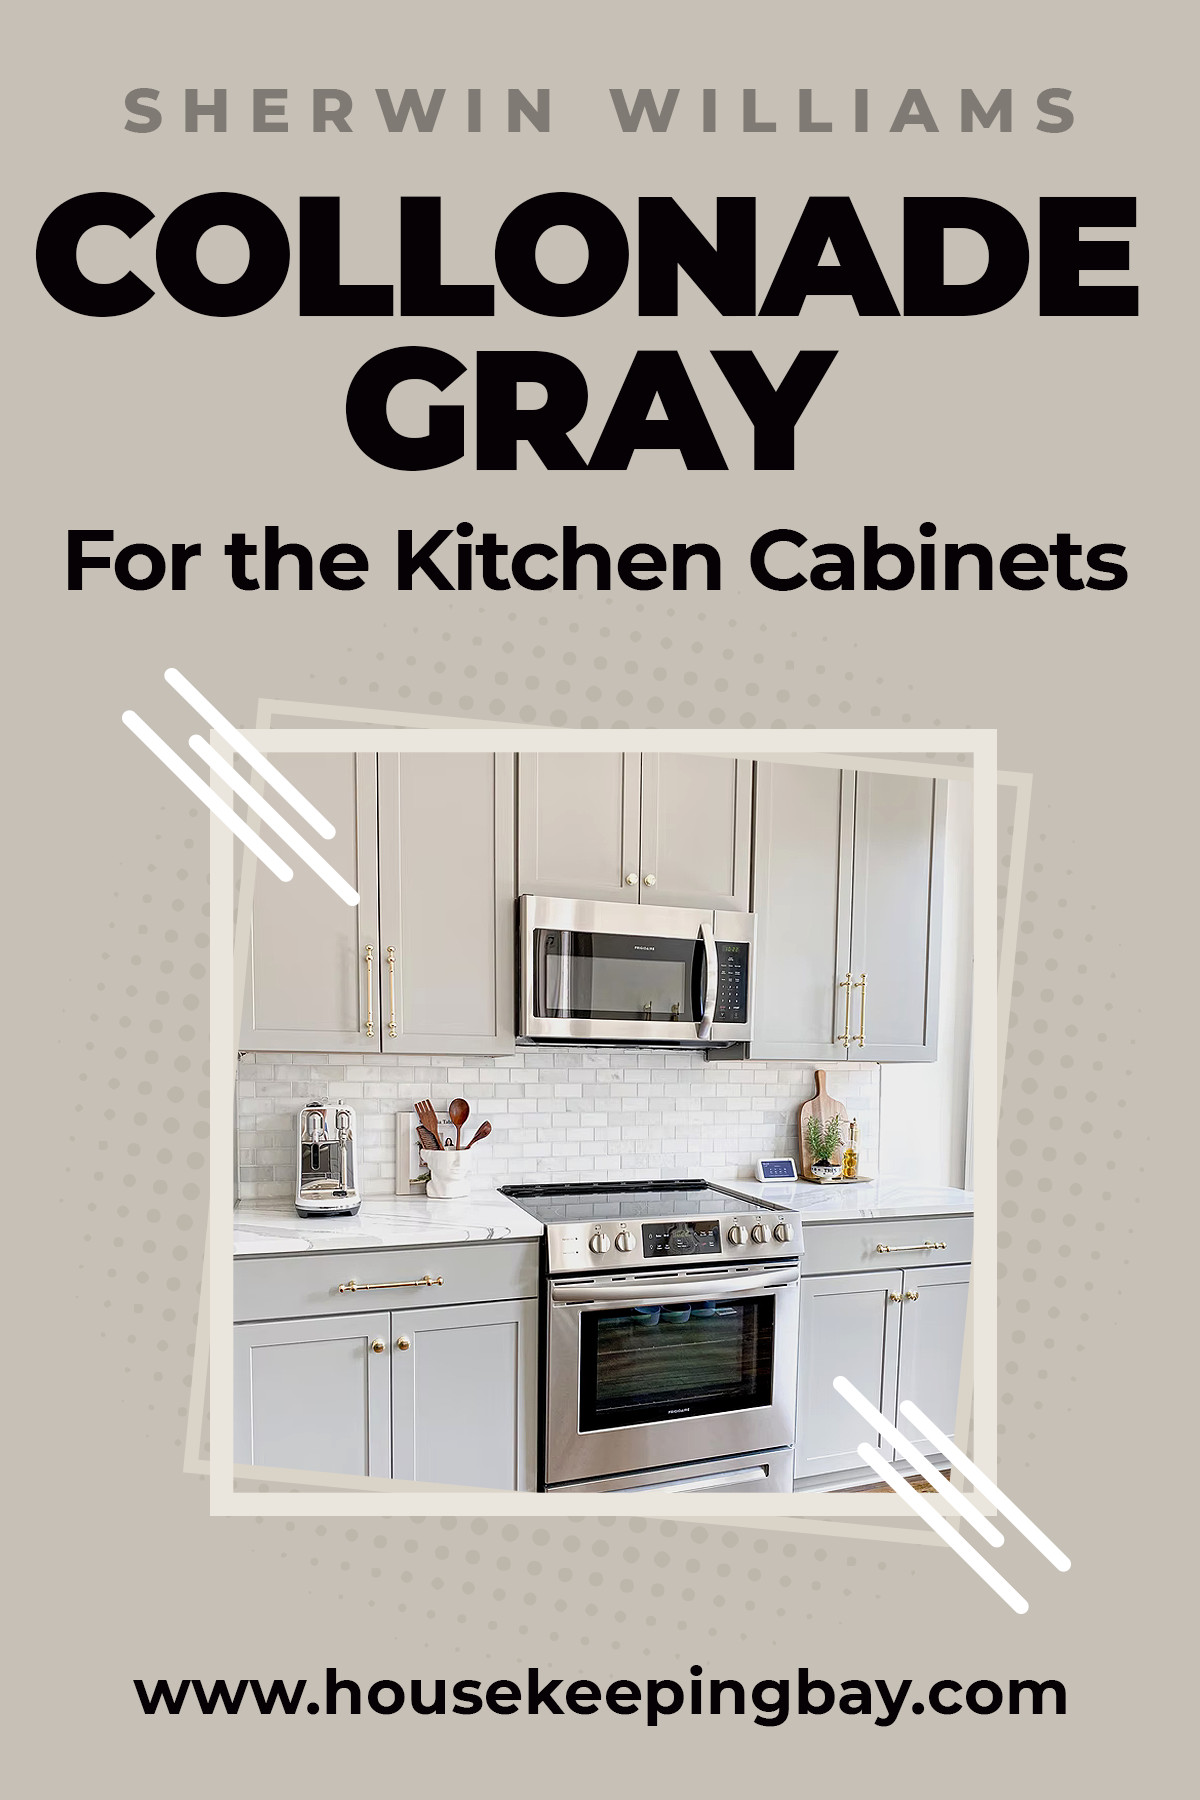 Collonade gray for the kitchen cabinets